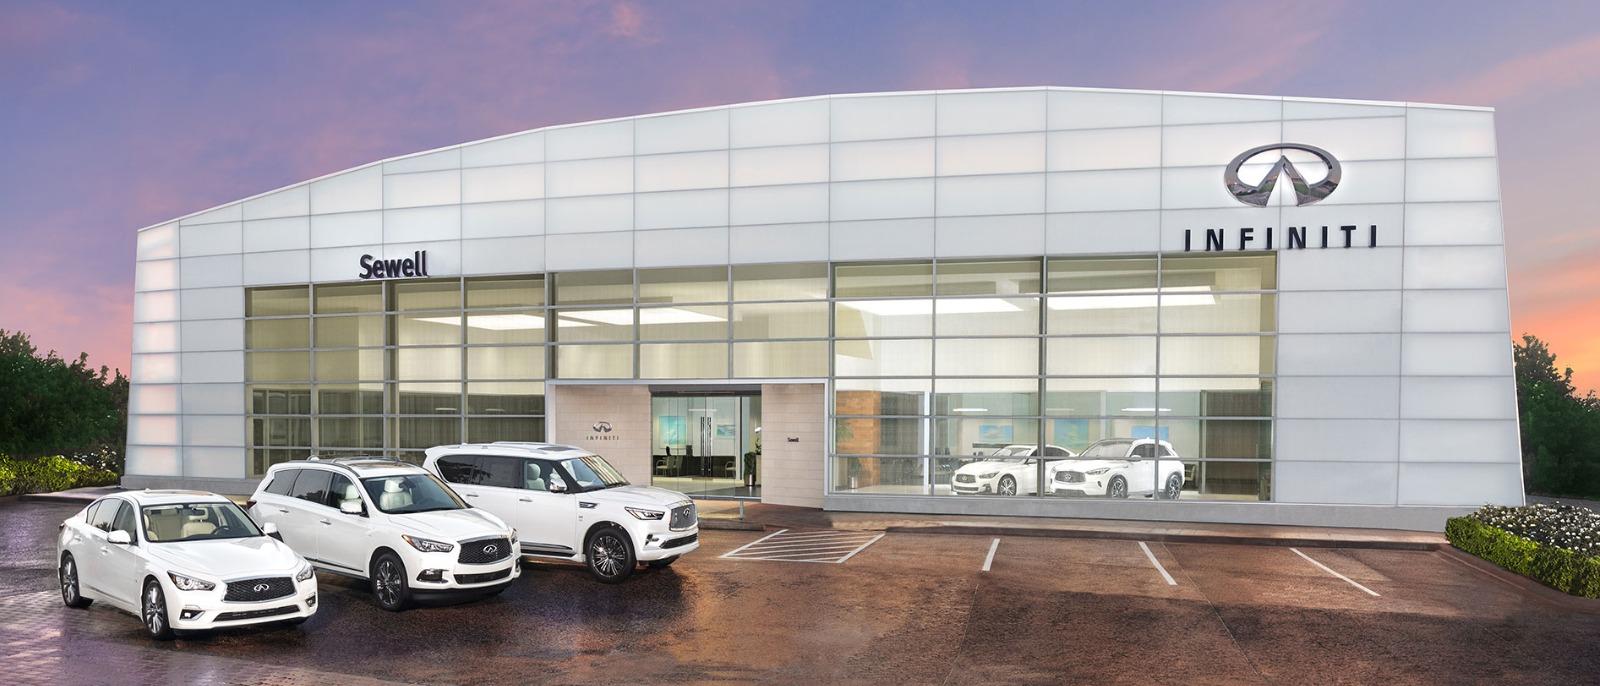 Sewell INFINITI Collision Center of Fort Worth